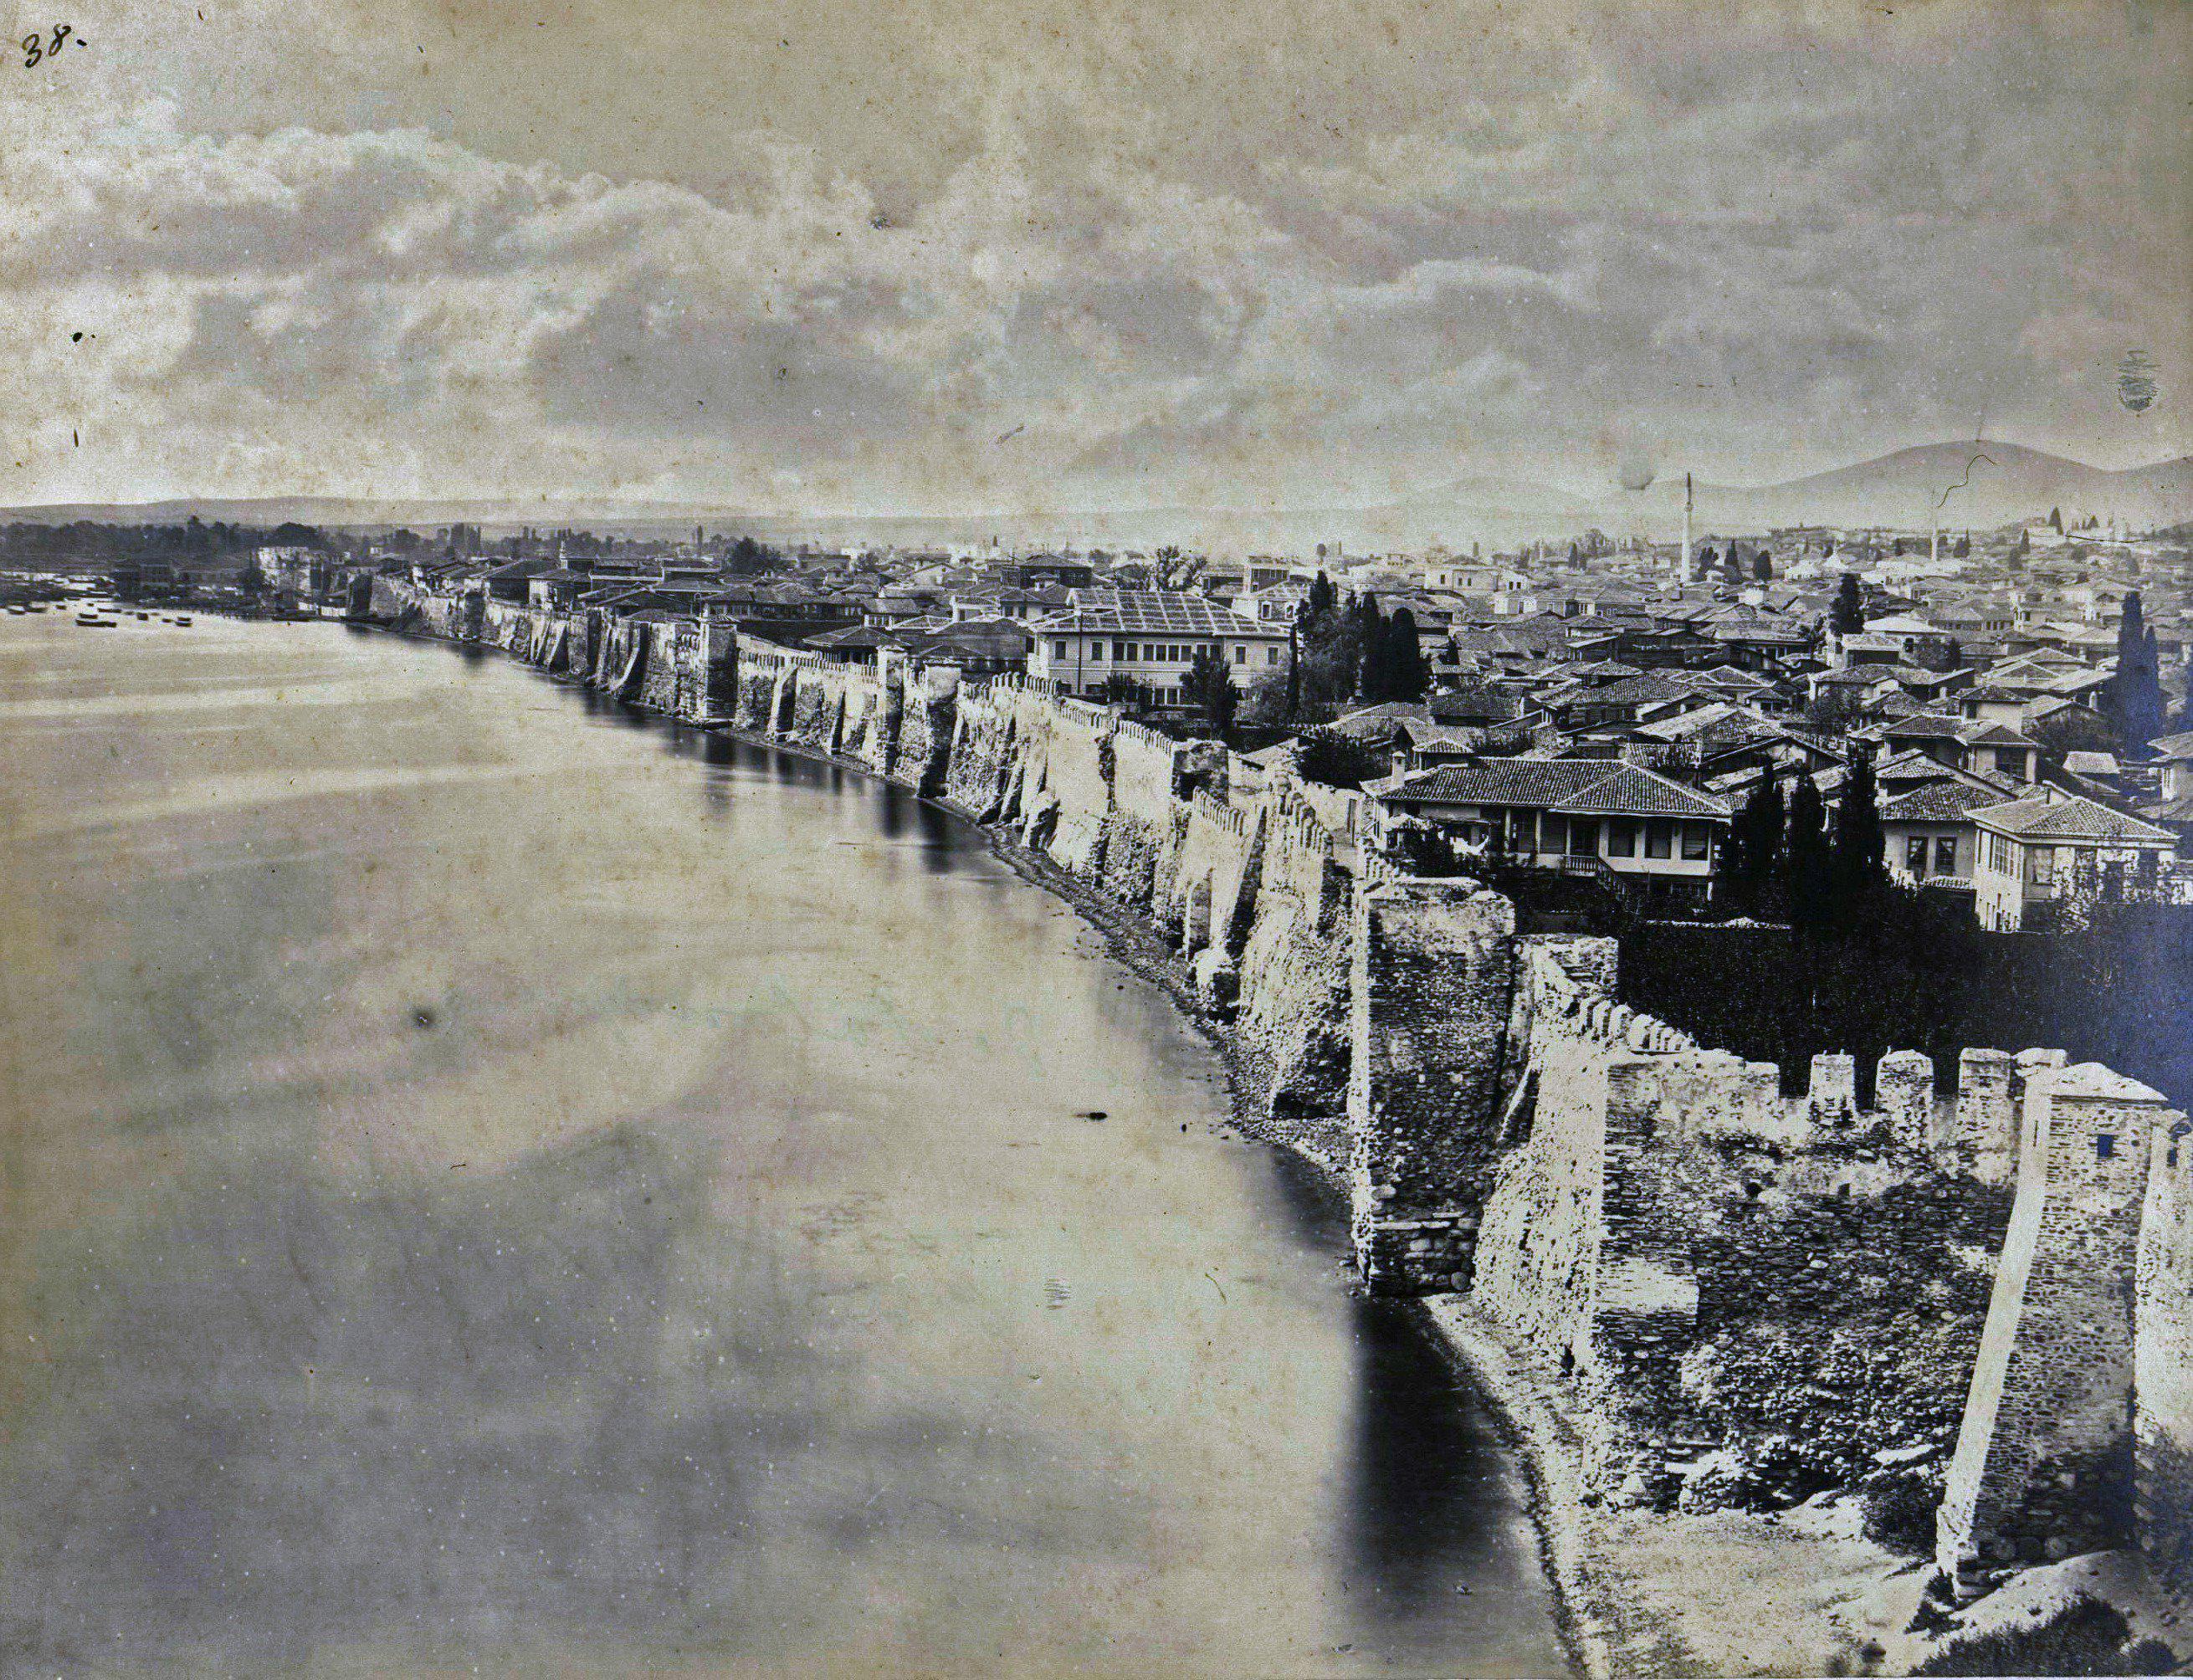 An old photo of the 4th century CE Byzantine Sea Walls of Thessaloniki, in Greece, taken in 1860. The walls were demolished as part of the Ottoman authorities' restructuring of Thessaloniki's urban fabric.jpeg